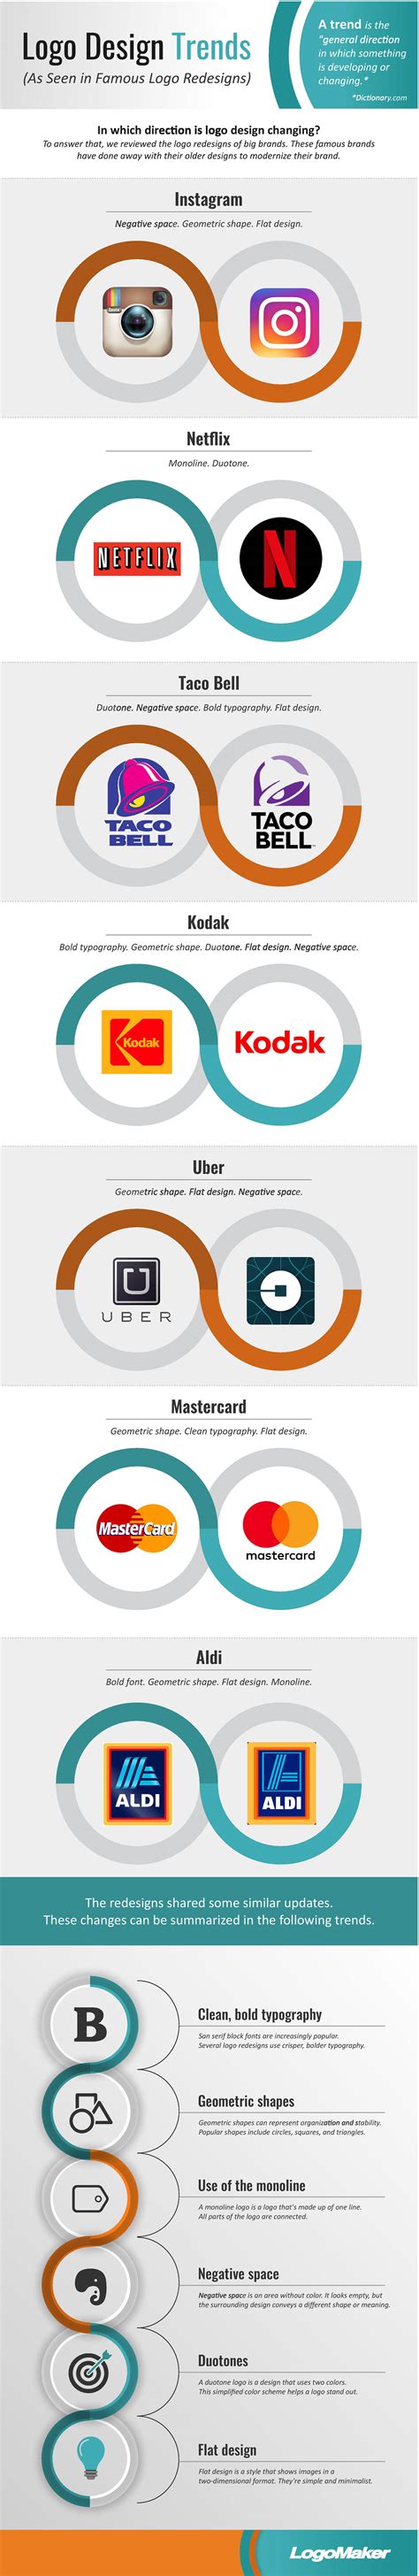 Logo Design Trends As Seen In Famous Logo Redesigns Infographic